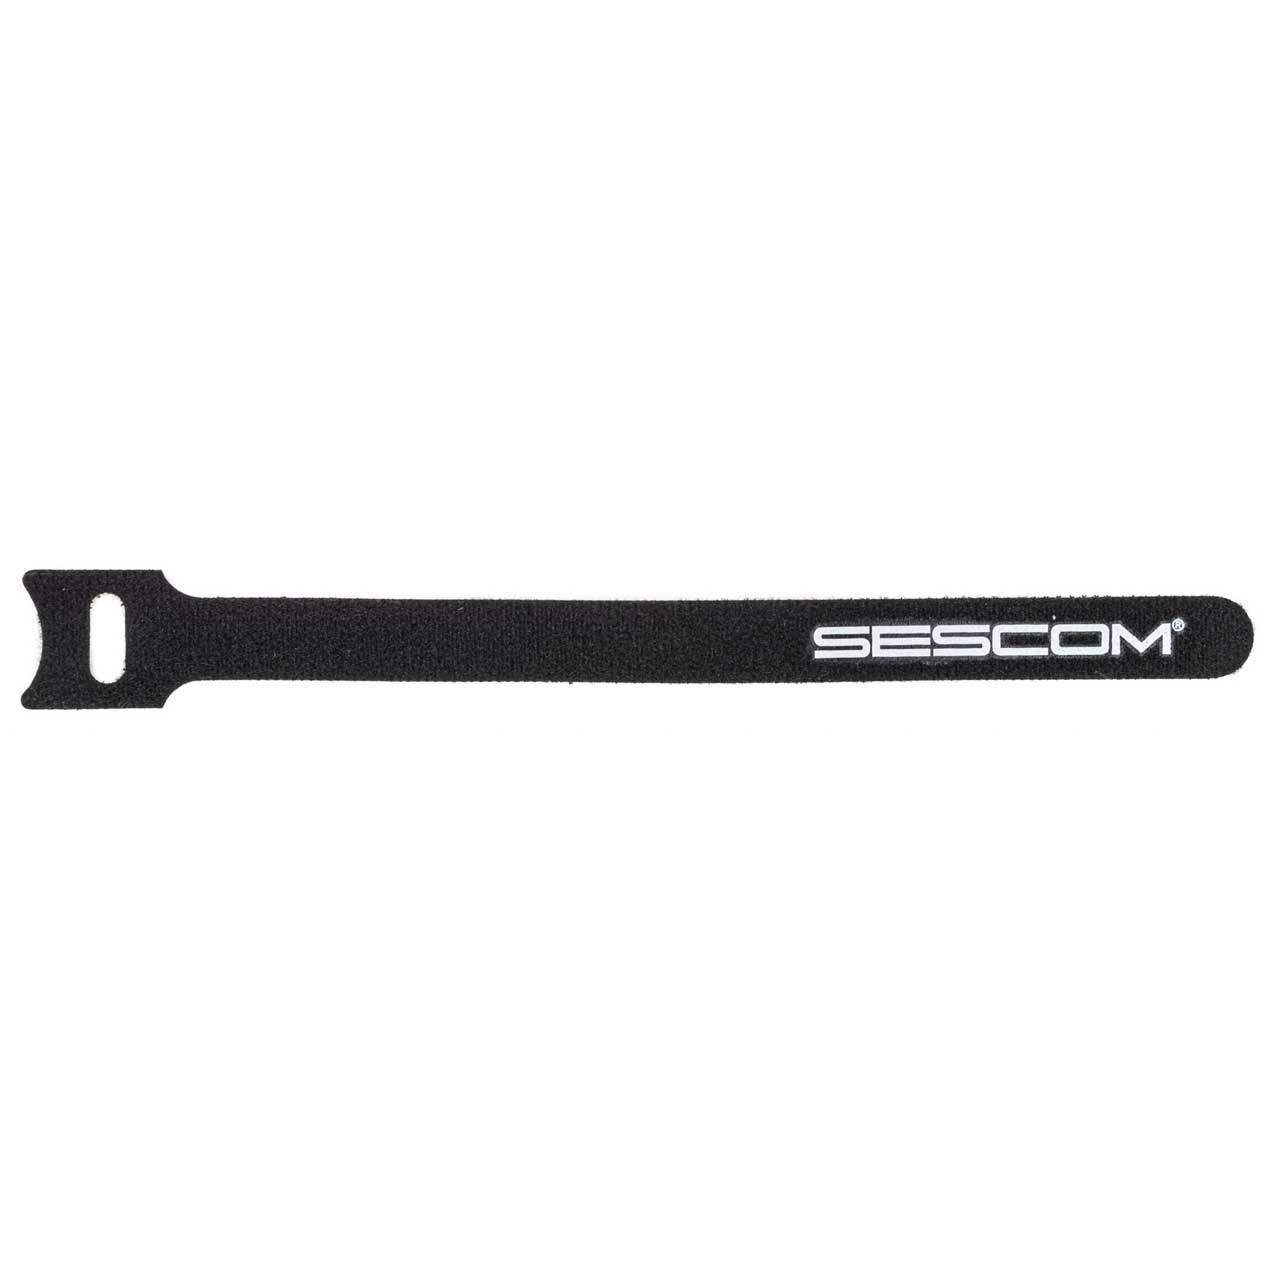 Sescom Hook and Loop Cable Wrap 12mm x 180mm Black with White Logo - 100 Pack SES-HKNLP-100PK